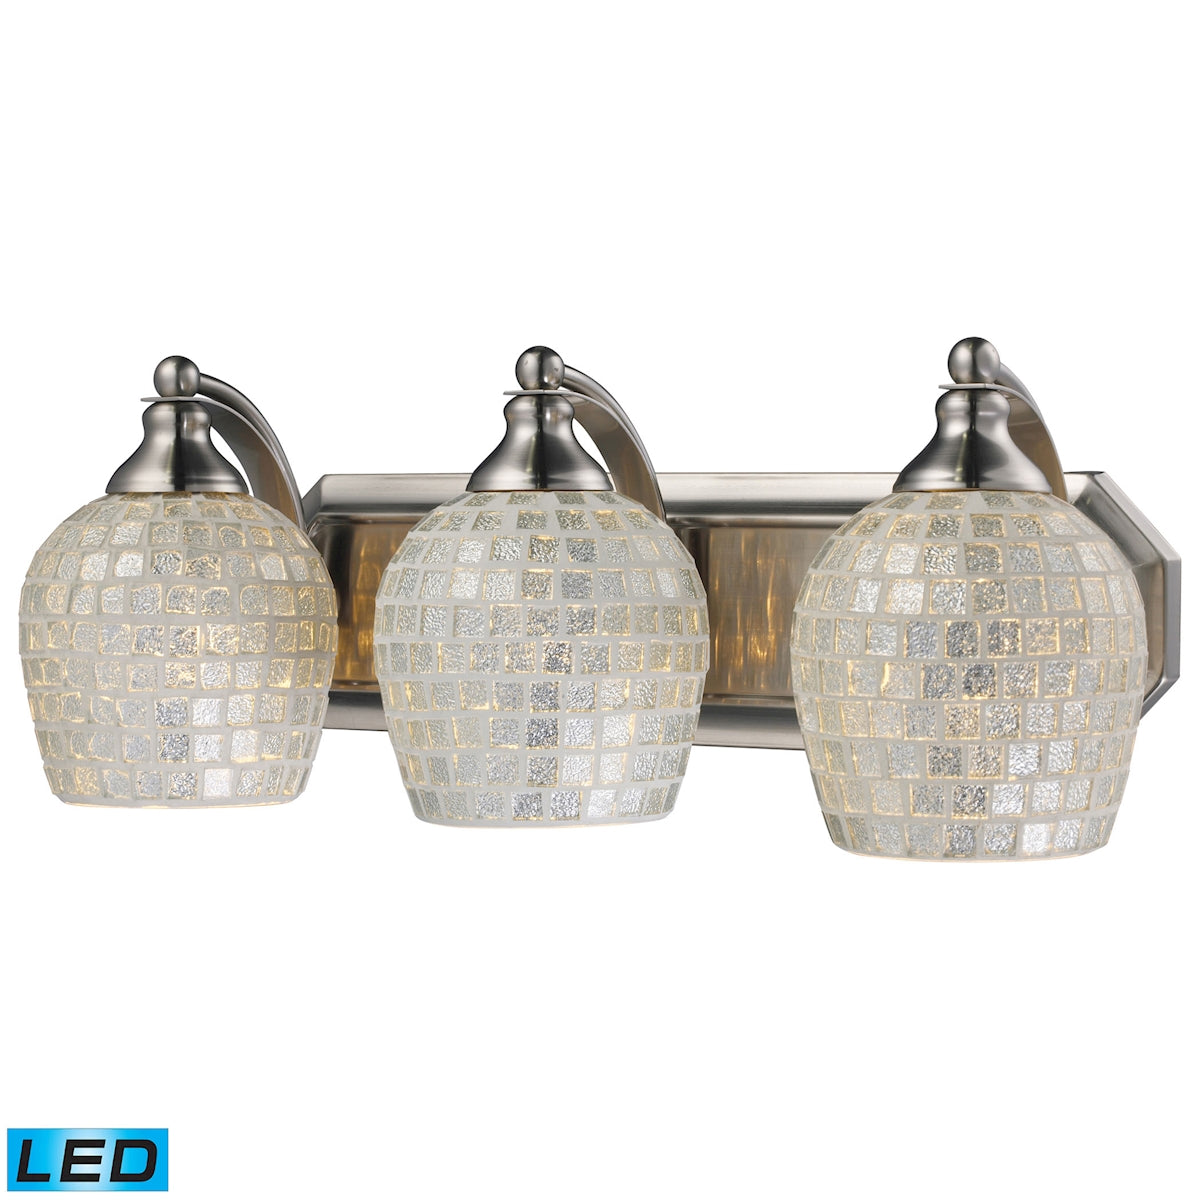 ELK Lighting 570-3N-SLV-LED Mix-N-Match Vanity 3-Light Wall Lamp in Satin Nickel with Silver Glass - Includes LED Bulbs